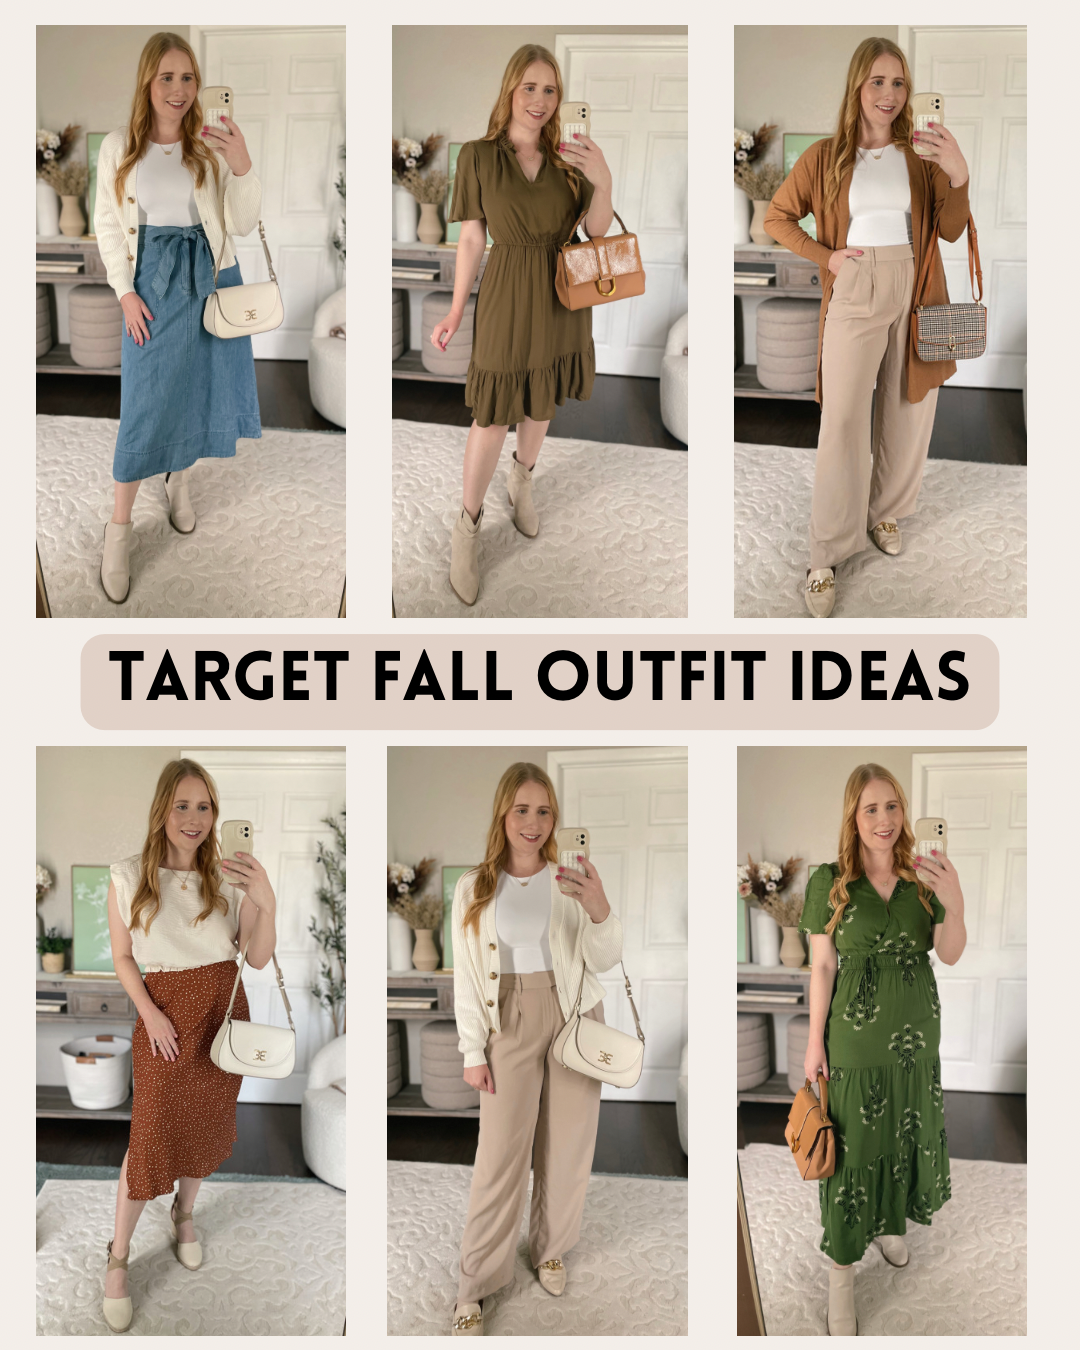 Target Fall Outfits for Women - Affordable by Amanda